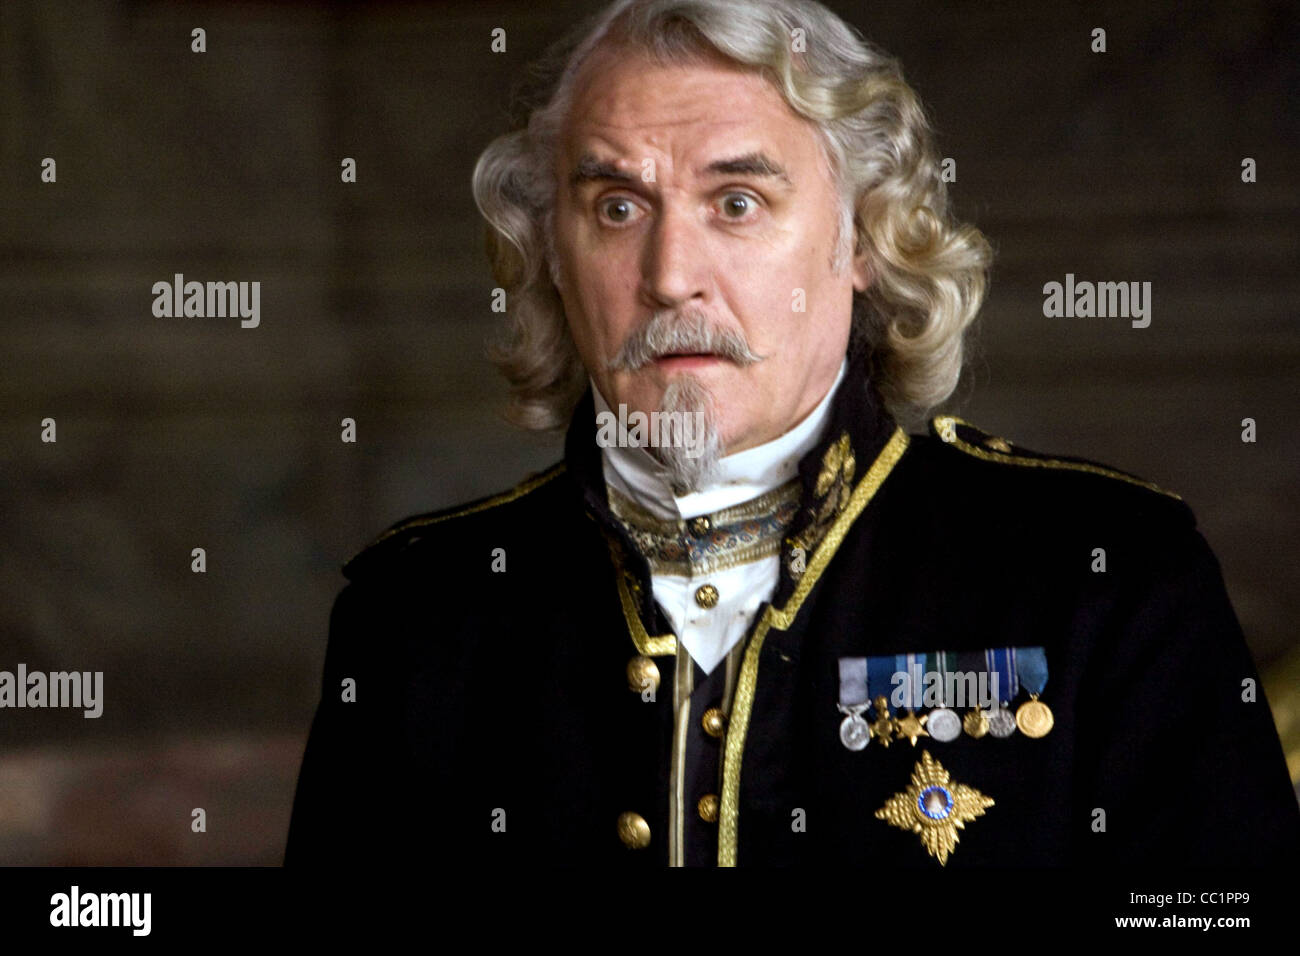 BILLY CONNOLLY GULLIVER'S TRAVELS (2010 Stock Photo - Alamy